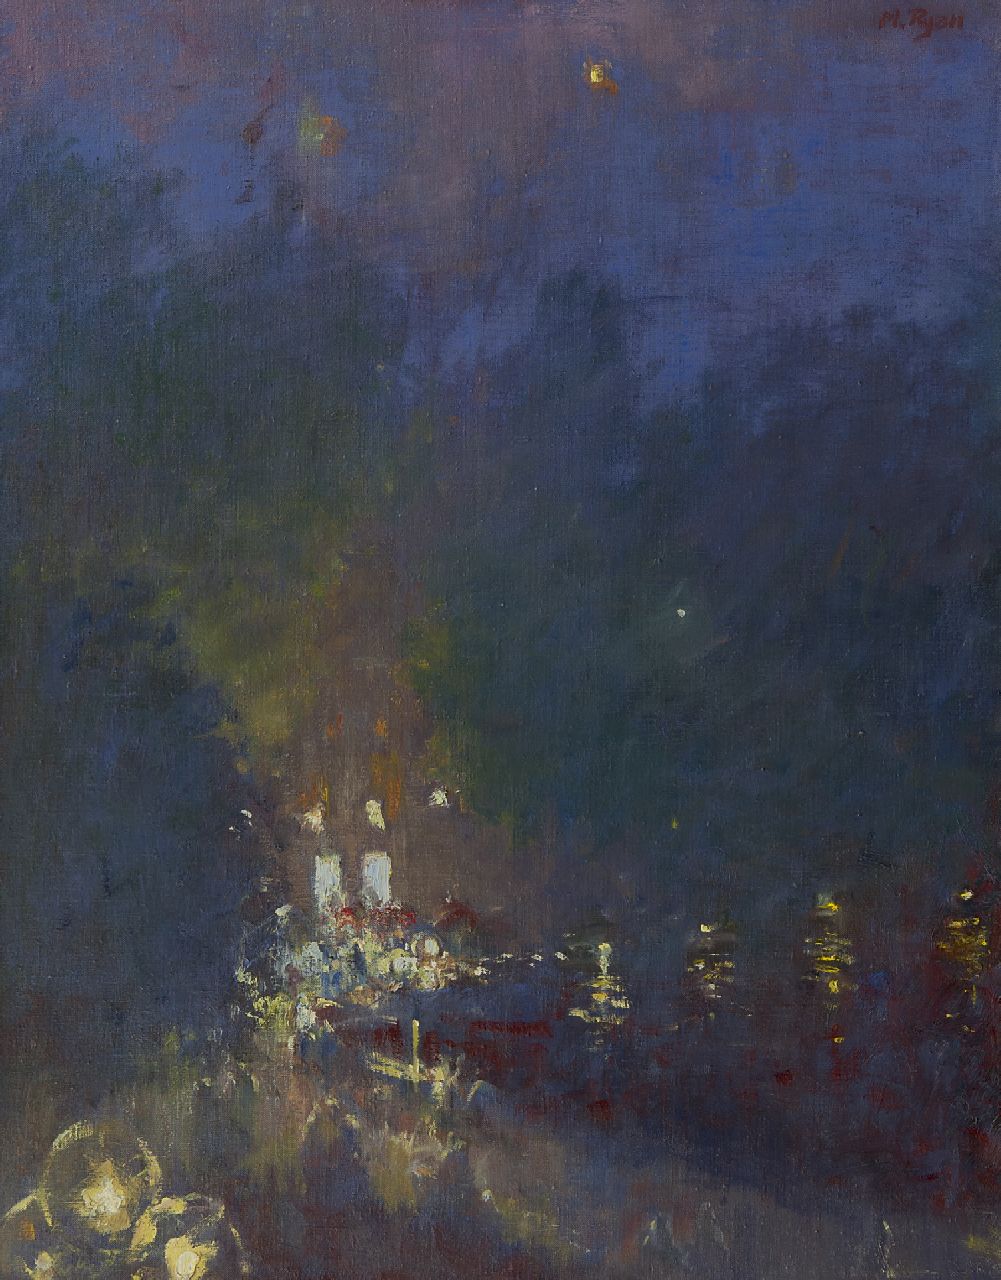 Ryan M.  | Michael Ryan | Paintings offered for sale | Twilight Leidseplein, Amsterdam, oil on canvas 90.0 x 70.2 cm, signed l.l. and painted 1984, without frame